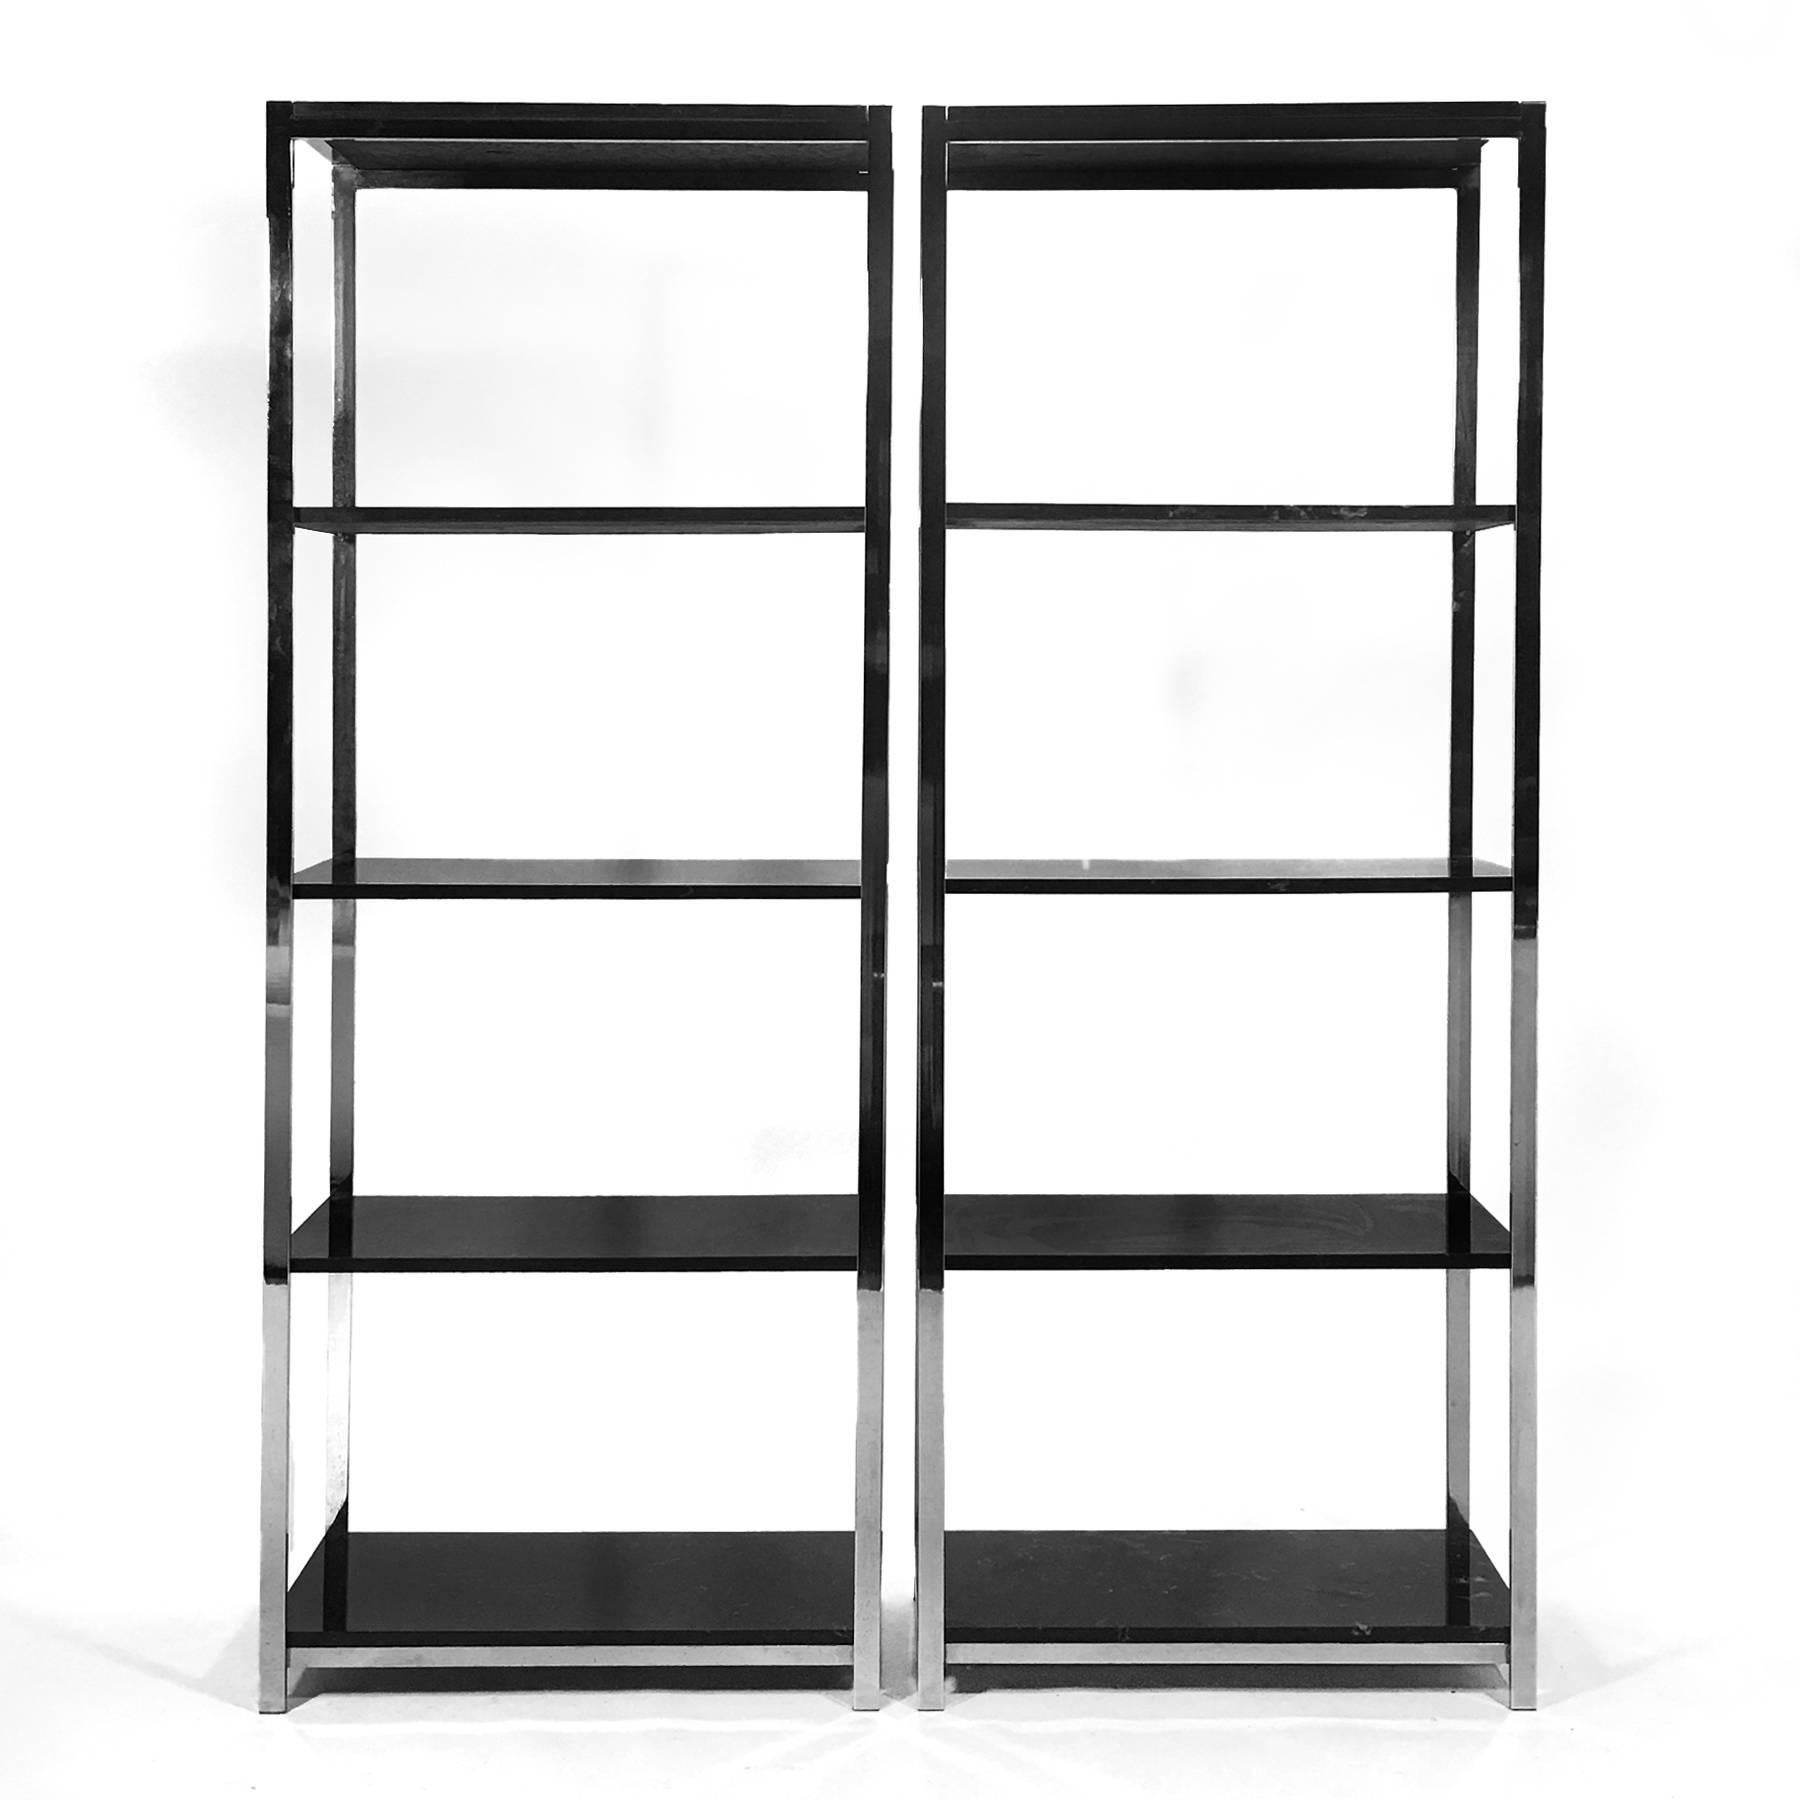 This handsome pair of étagères are very similar to Baughman's work for Directional and DIA. They feature chromed steel frames and marbleite shelves.